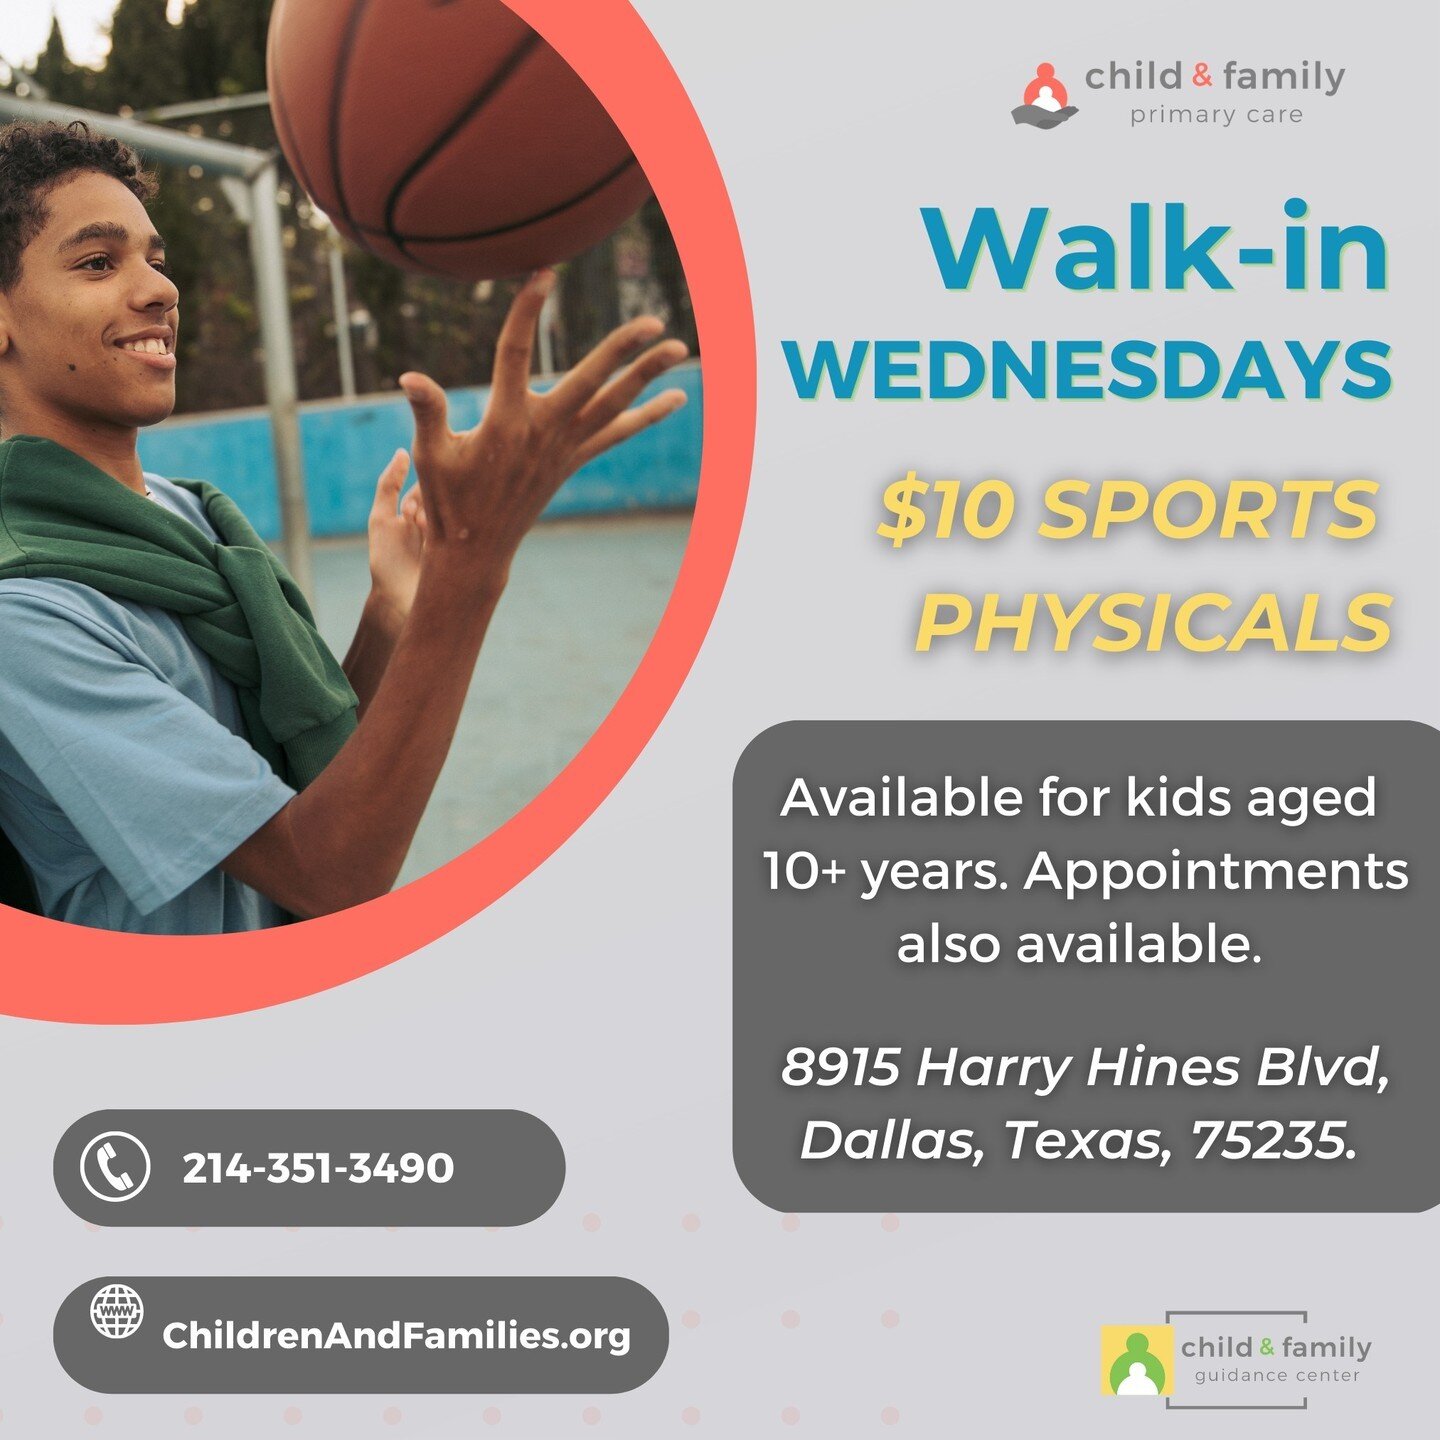 Every Wednesday, walk-ins will be available from 9AM - 4PM for our $10 sports physicals! Other times are also available by appointment. If you have any questions, please message us or give us a call at 214.351.3490.